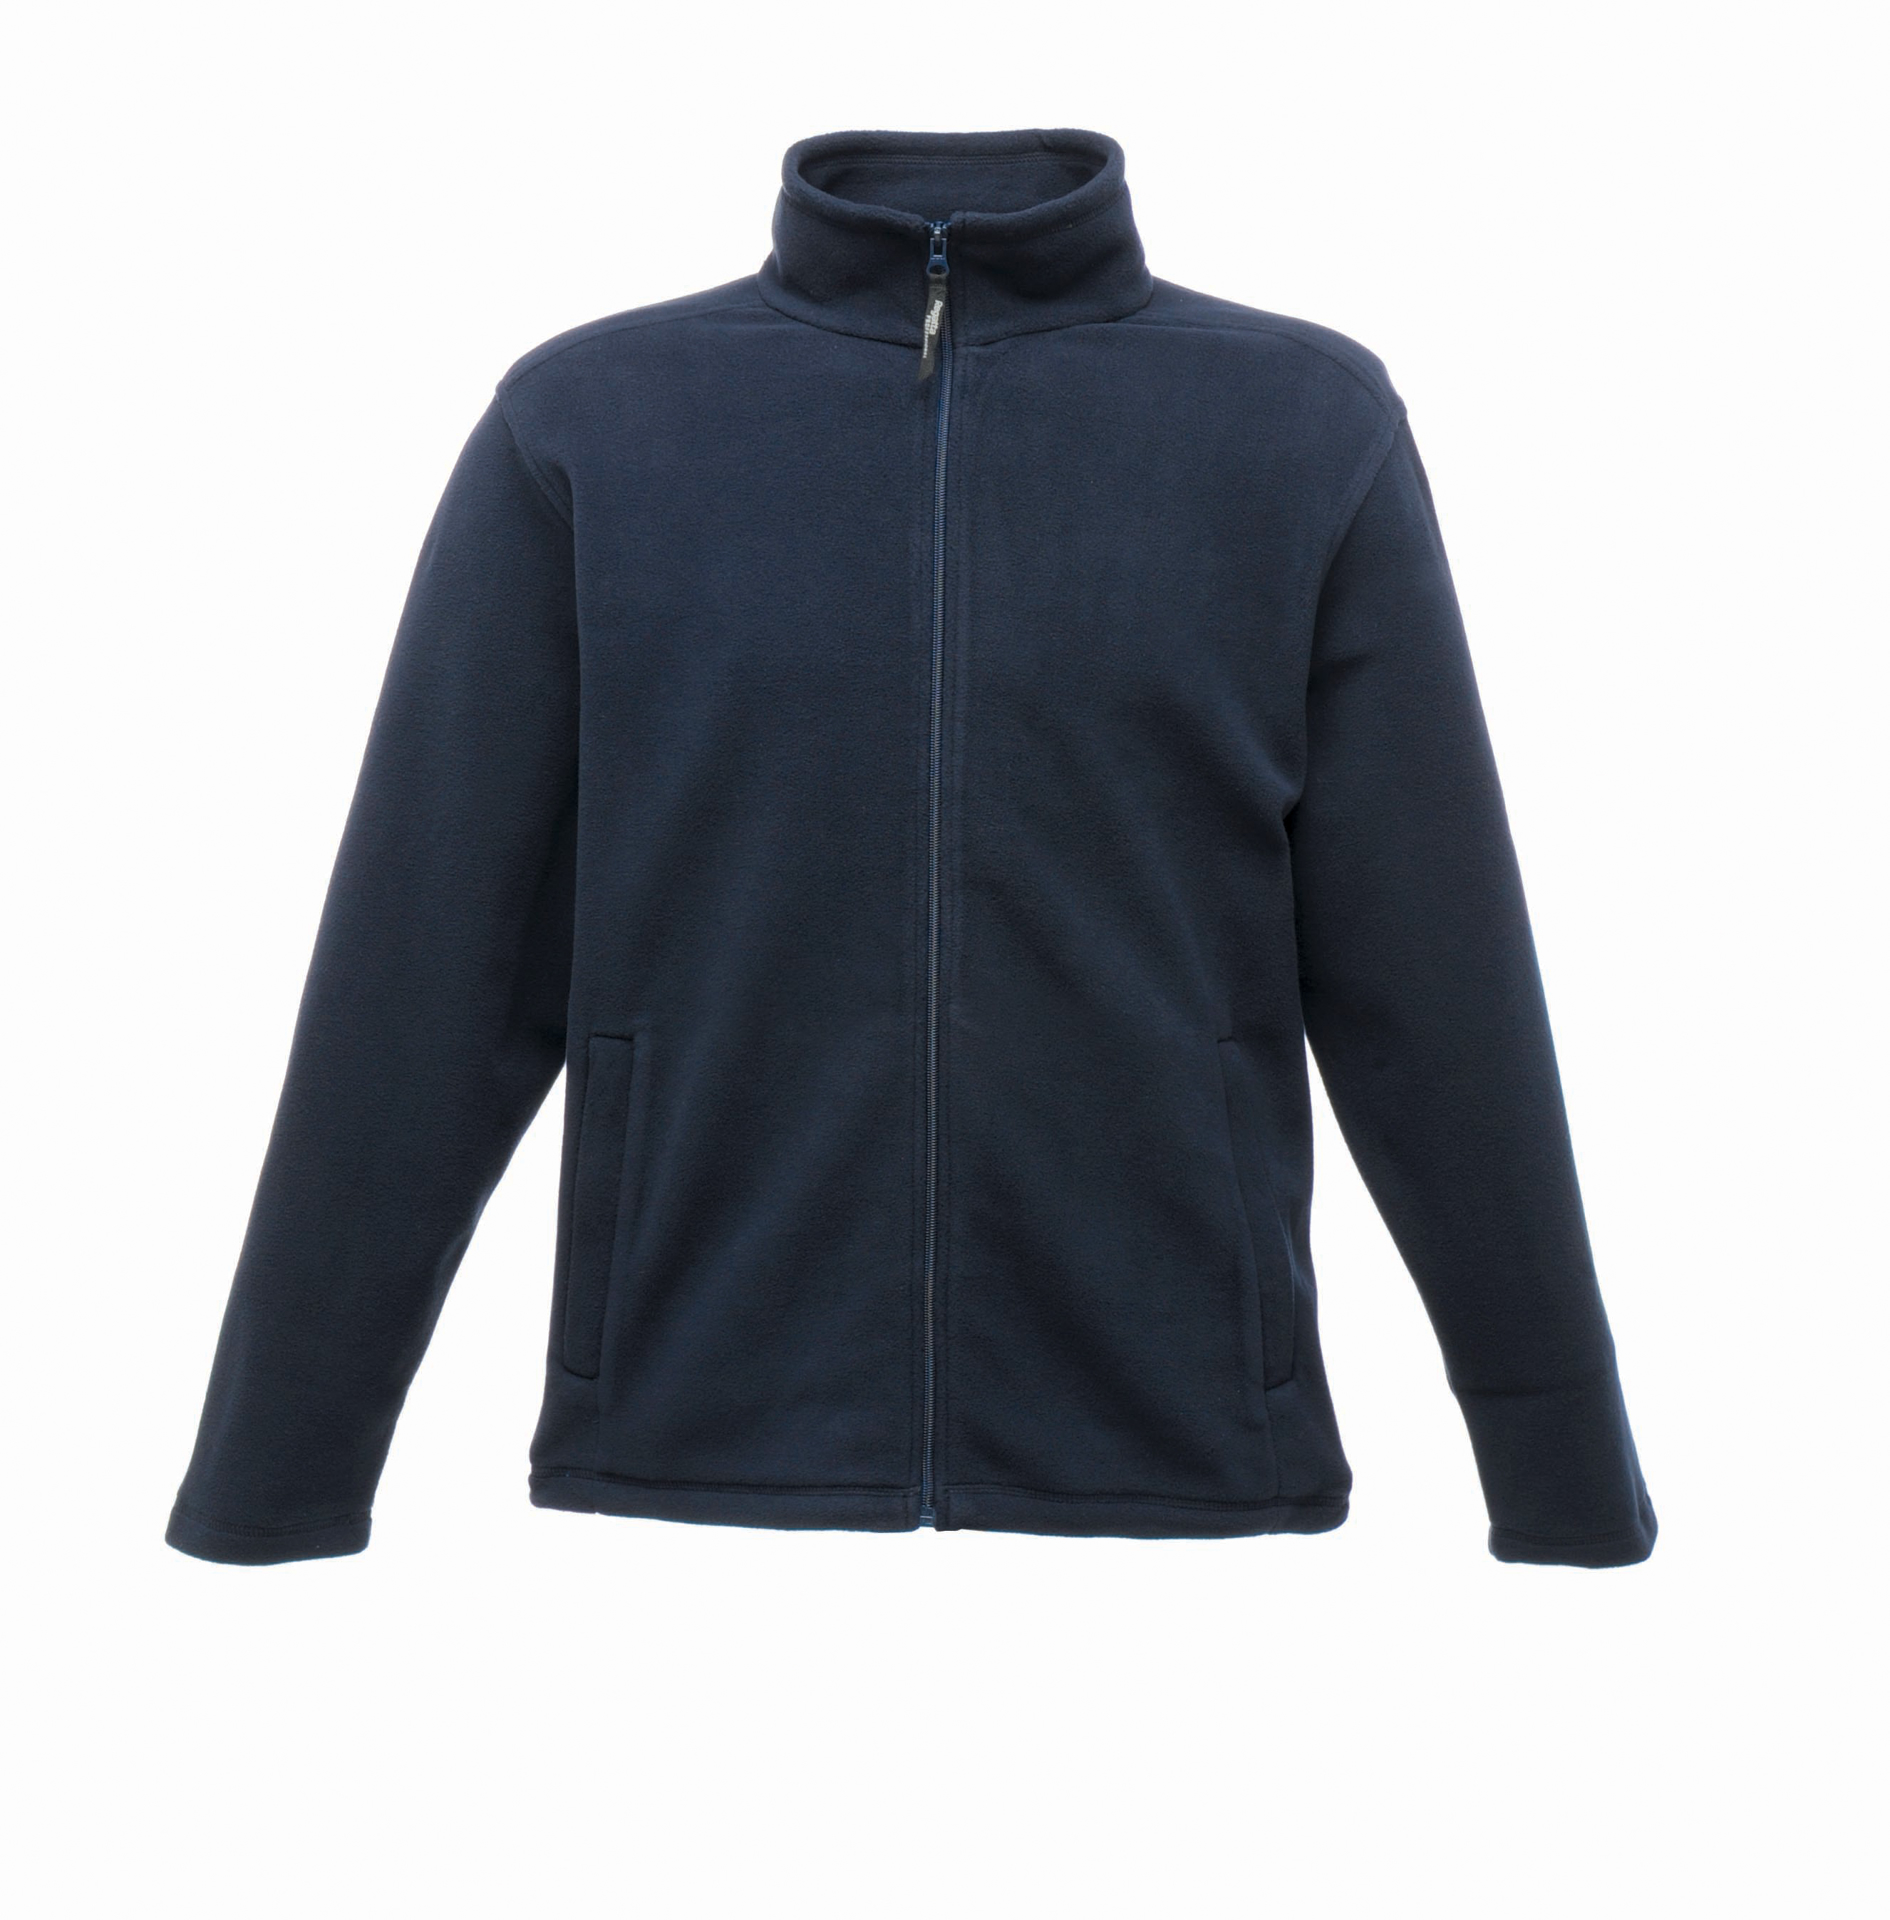 Full Zip Microfleece in navy with 2 zipped lower pockets